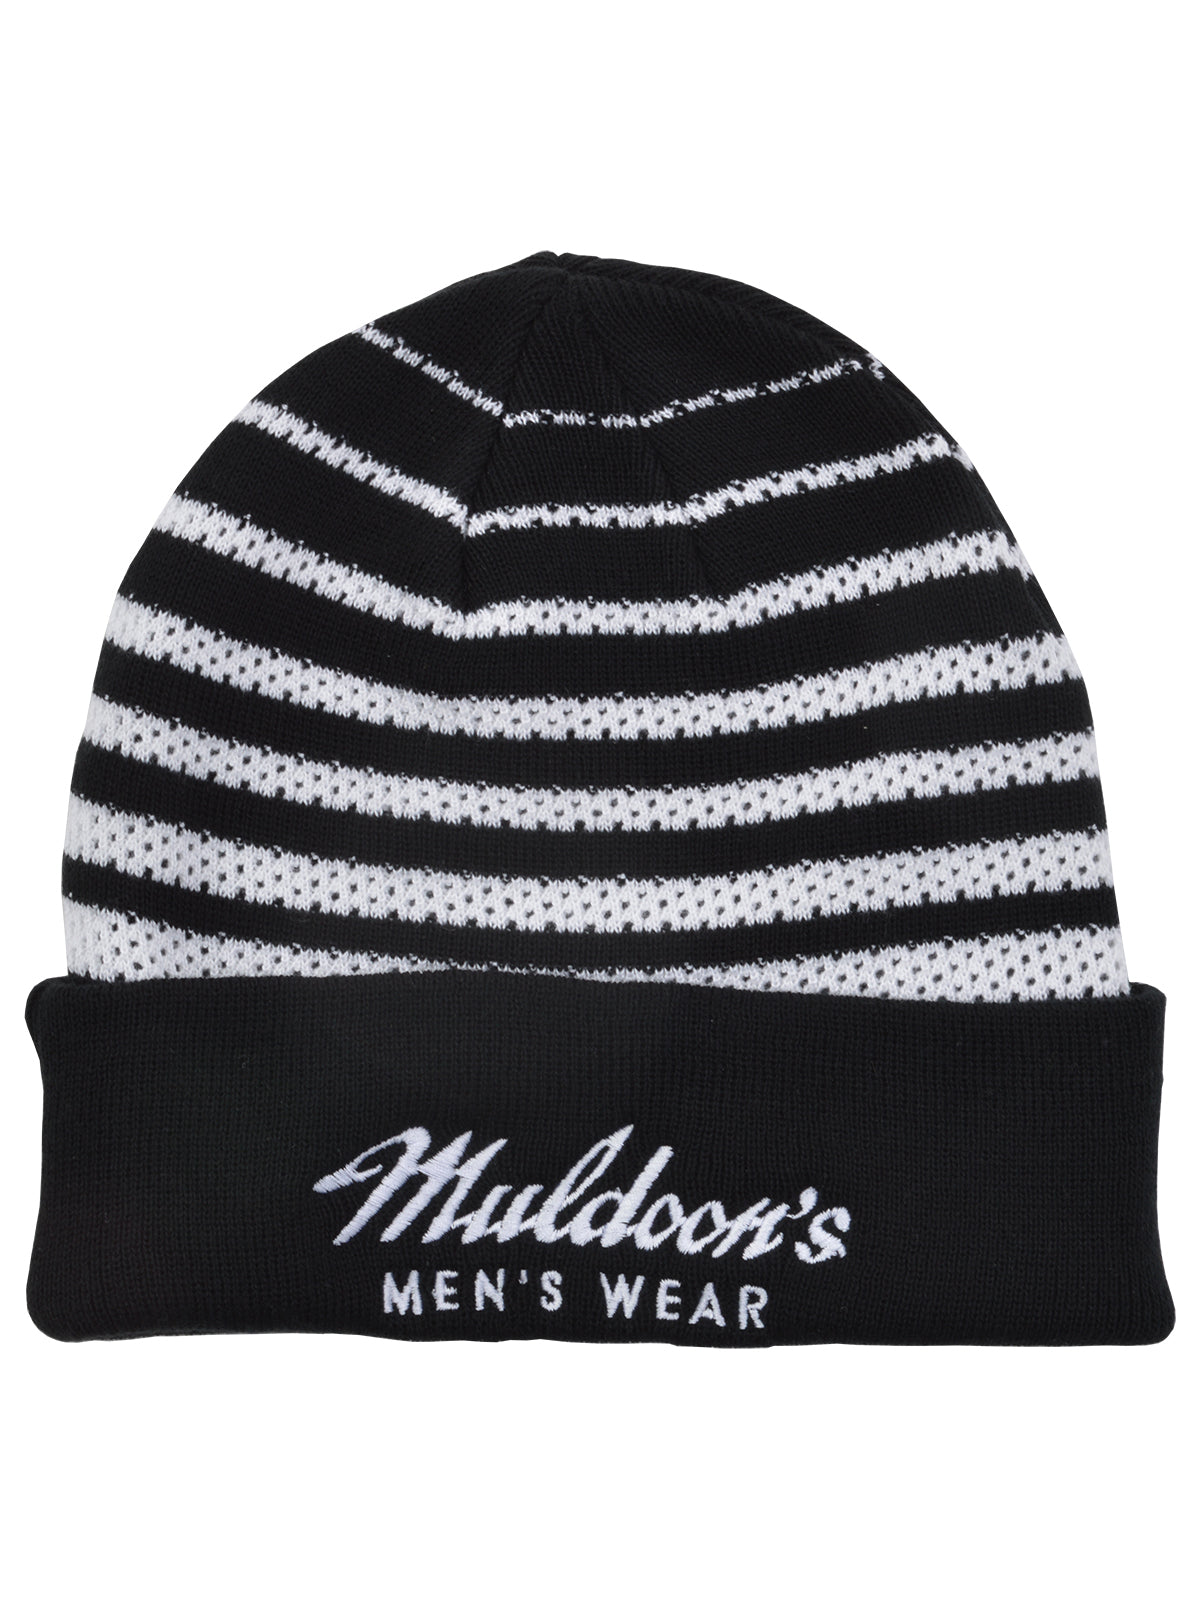 Muldoon's Acrylic Stocking Cap in Black / White Mix